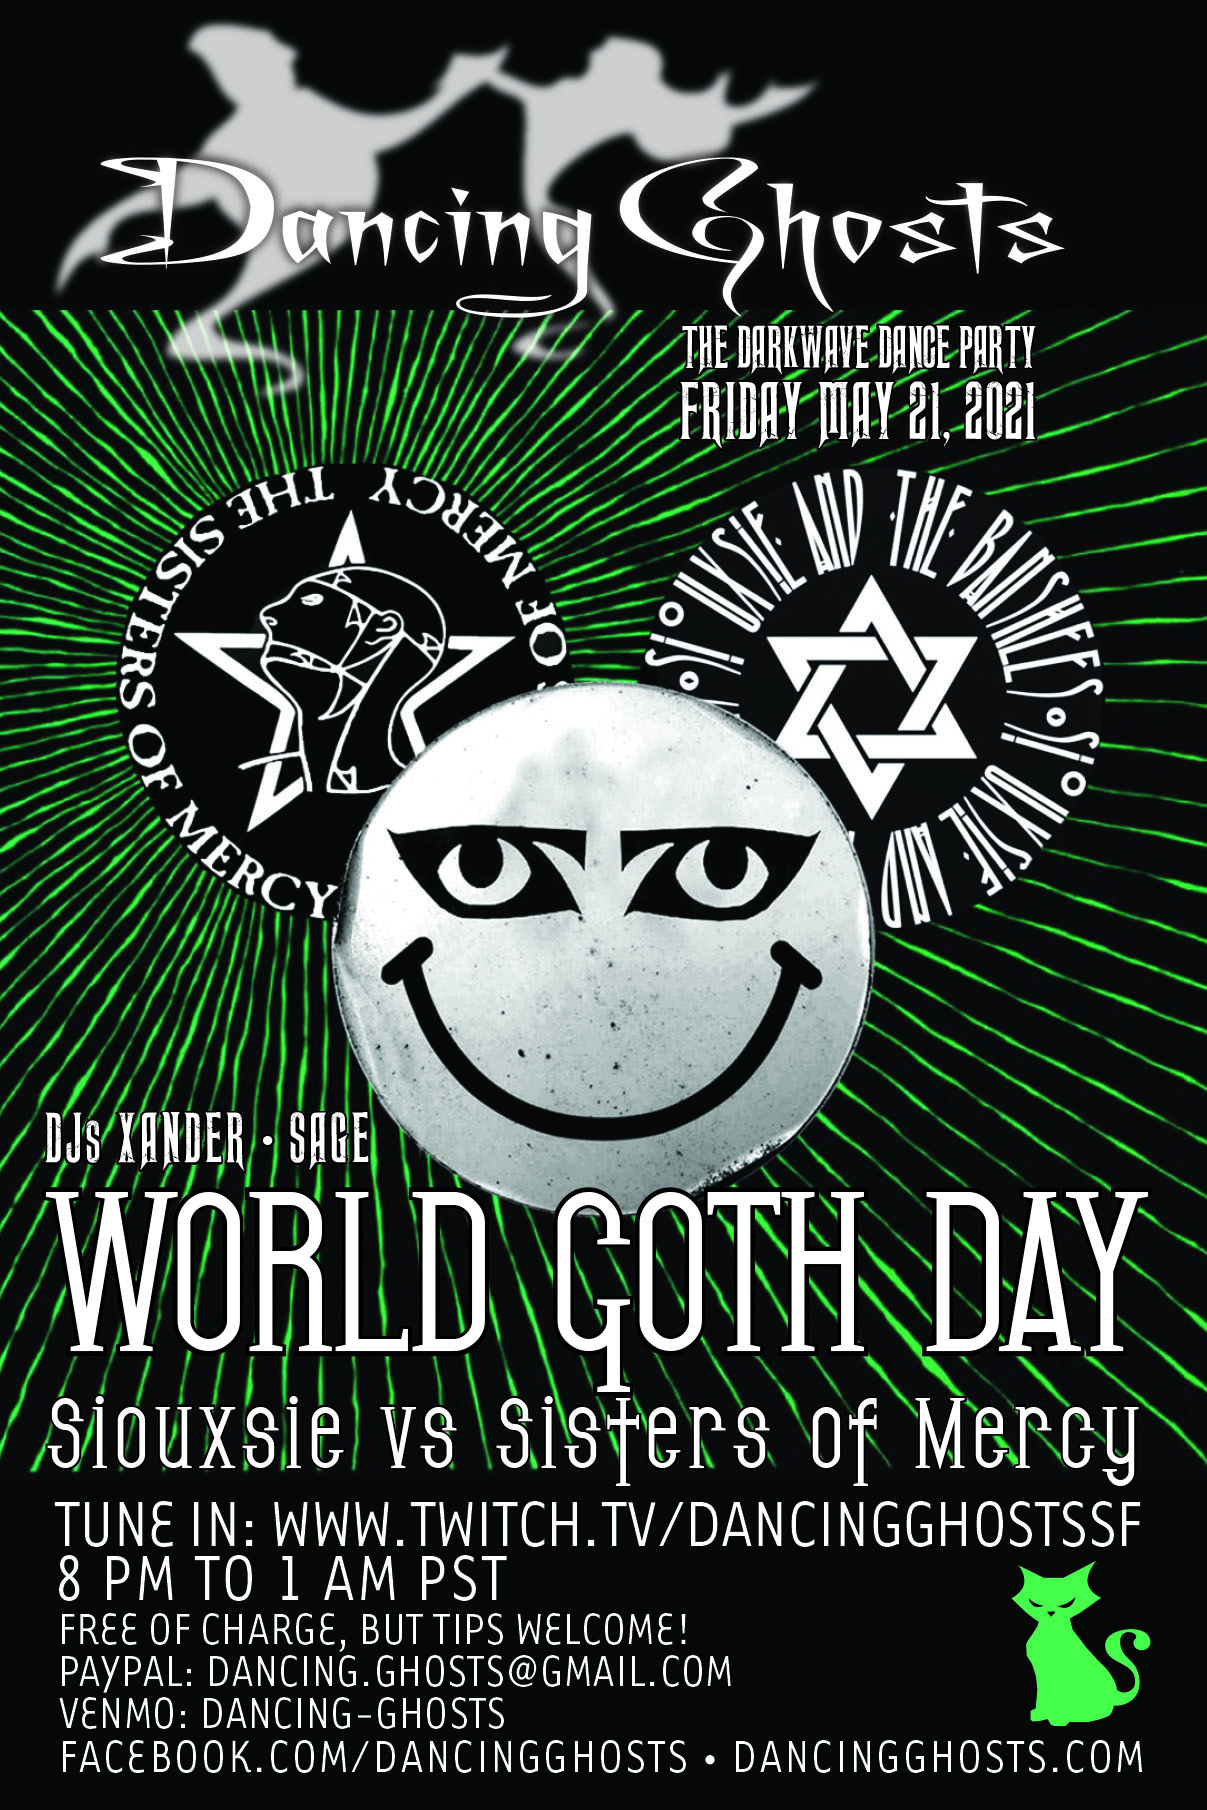 World Goth Day 2021 / Siouxsie vs Sisters / Dancing Ghosts! Dancing